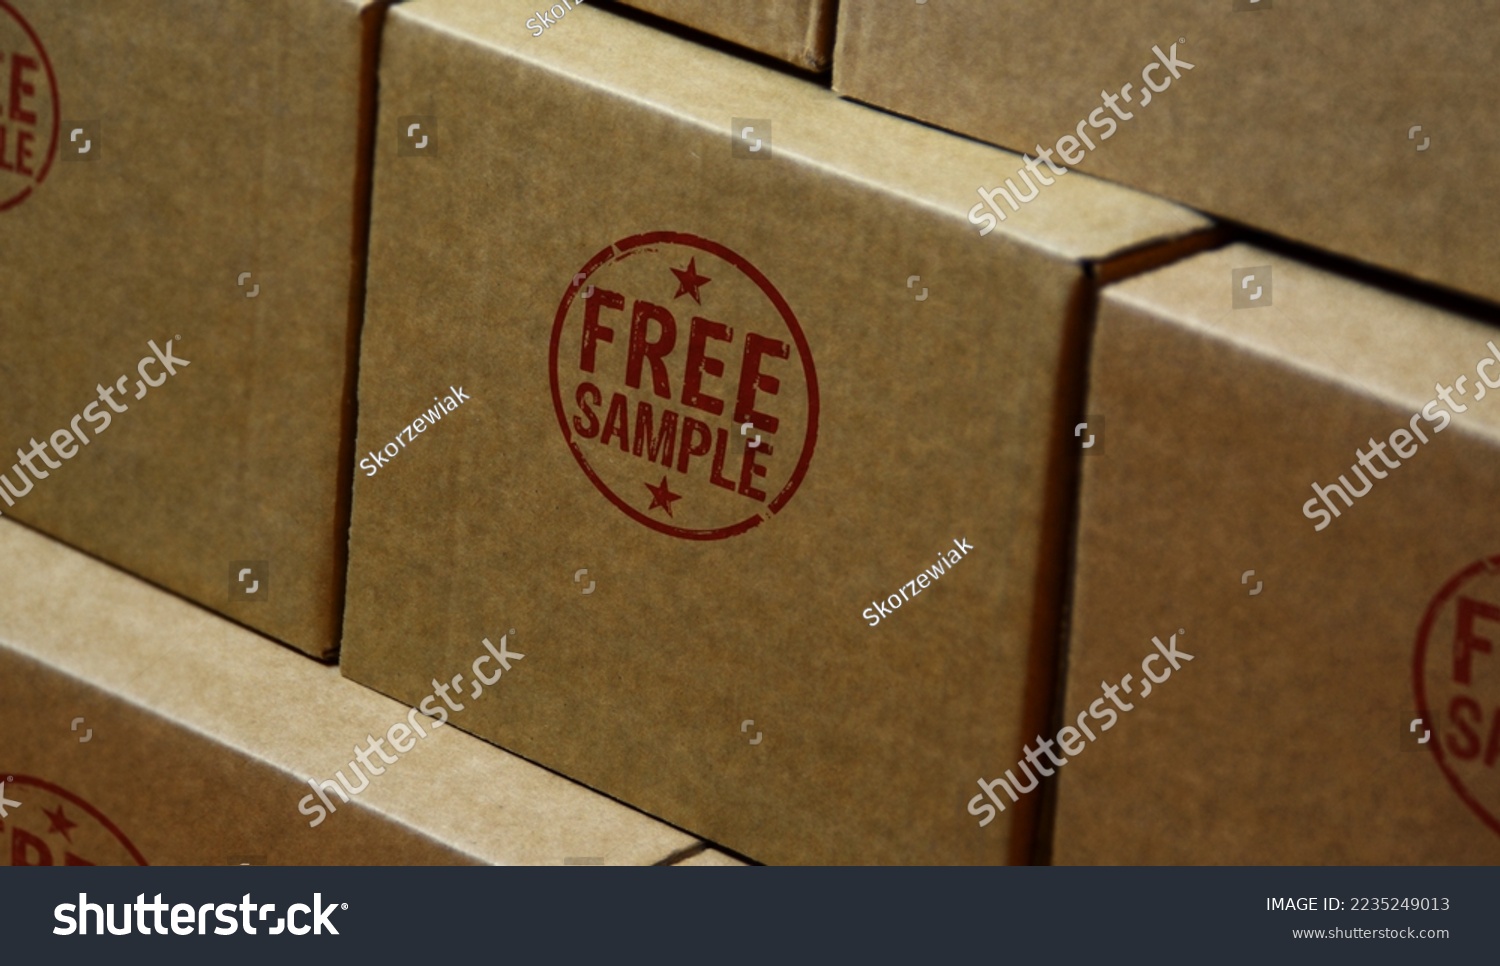 Free sample stamp printed on cardboard box. Gratis shopping retail product promotion concept. #2235249013